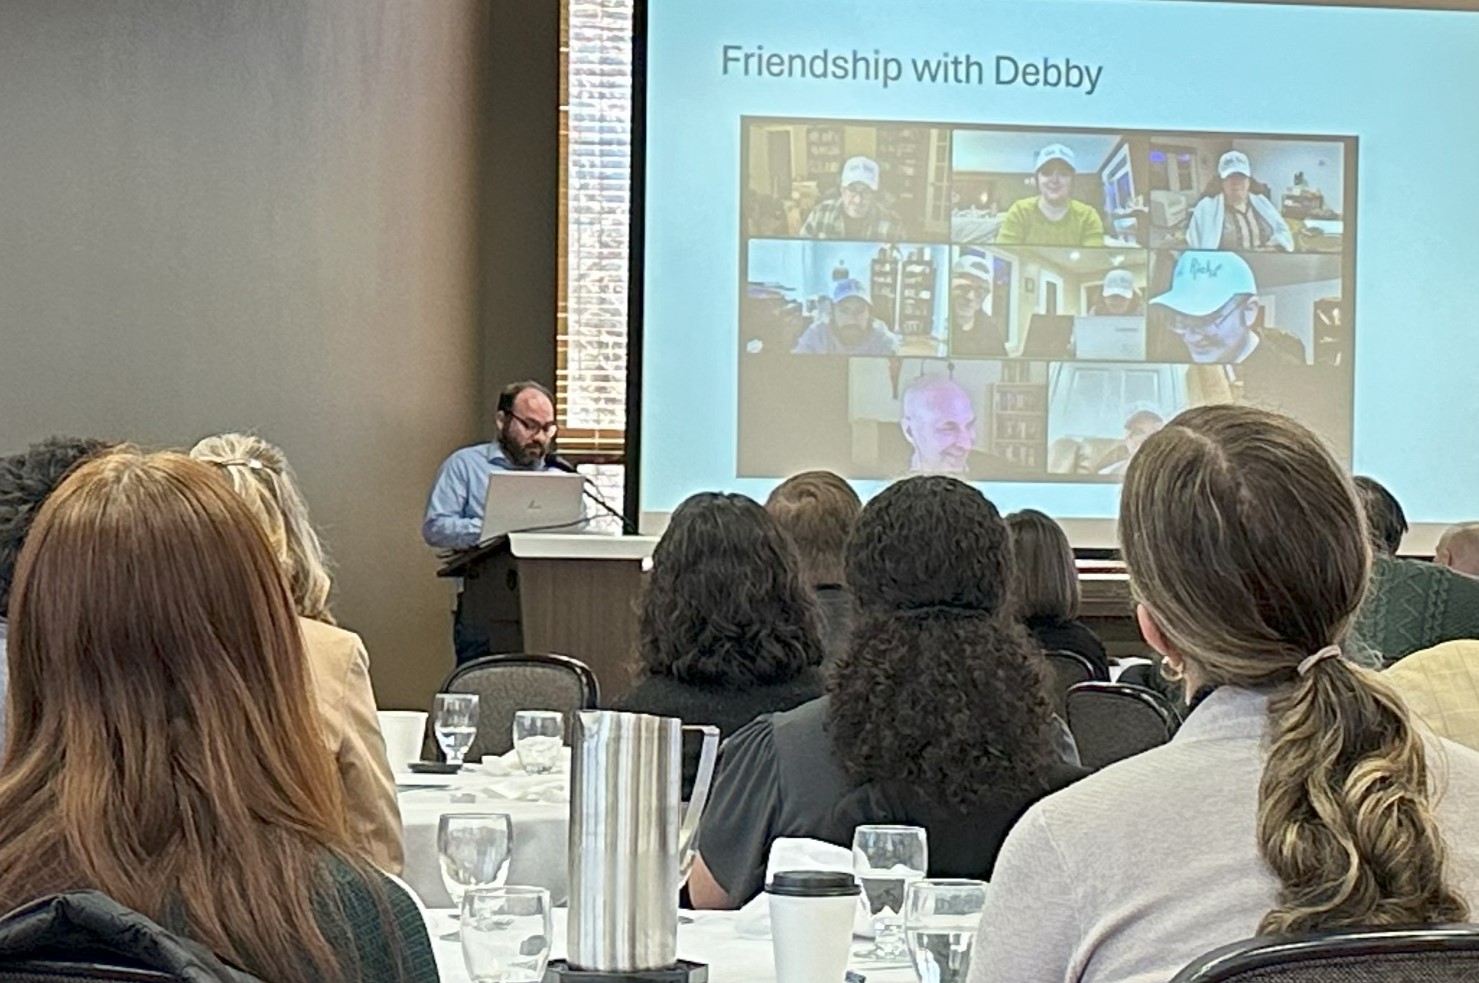 Dr. Ackerman speaks at the luncheon about his friendship with Debby Kashy.